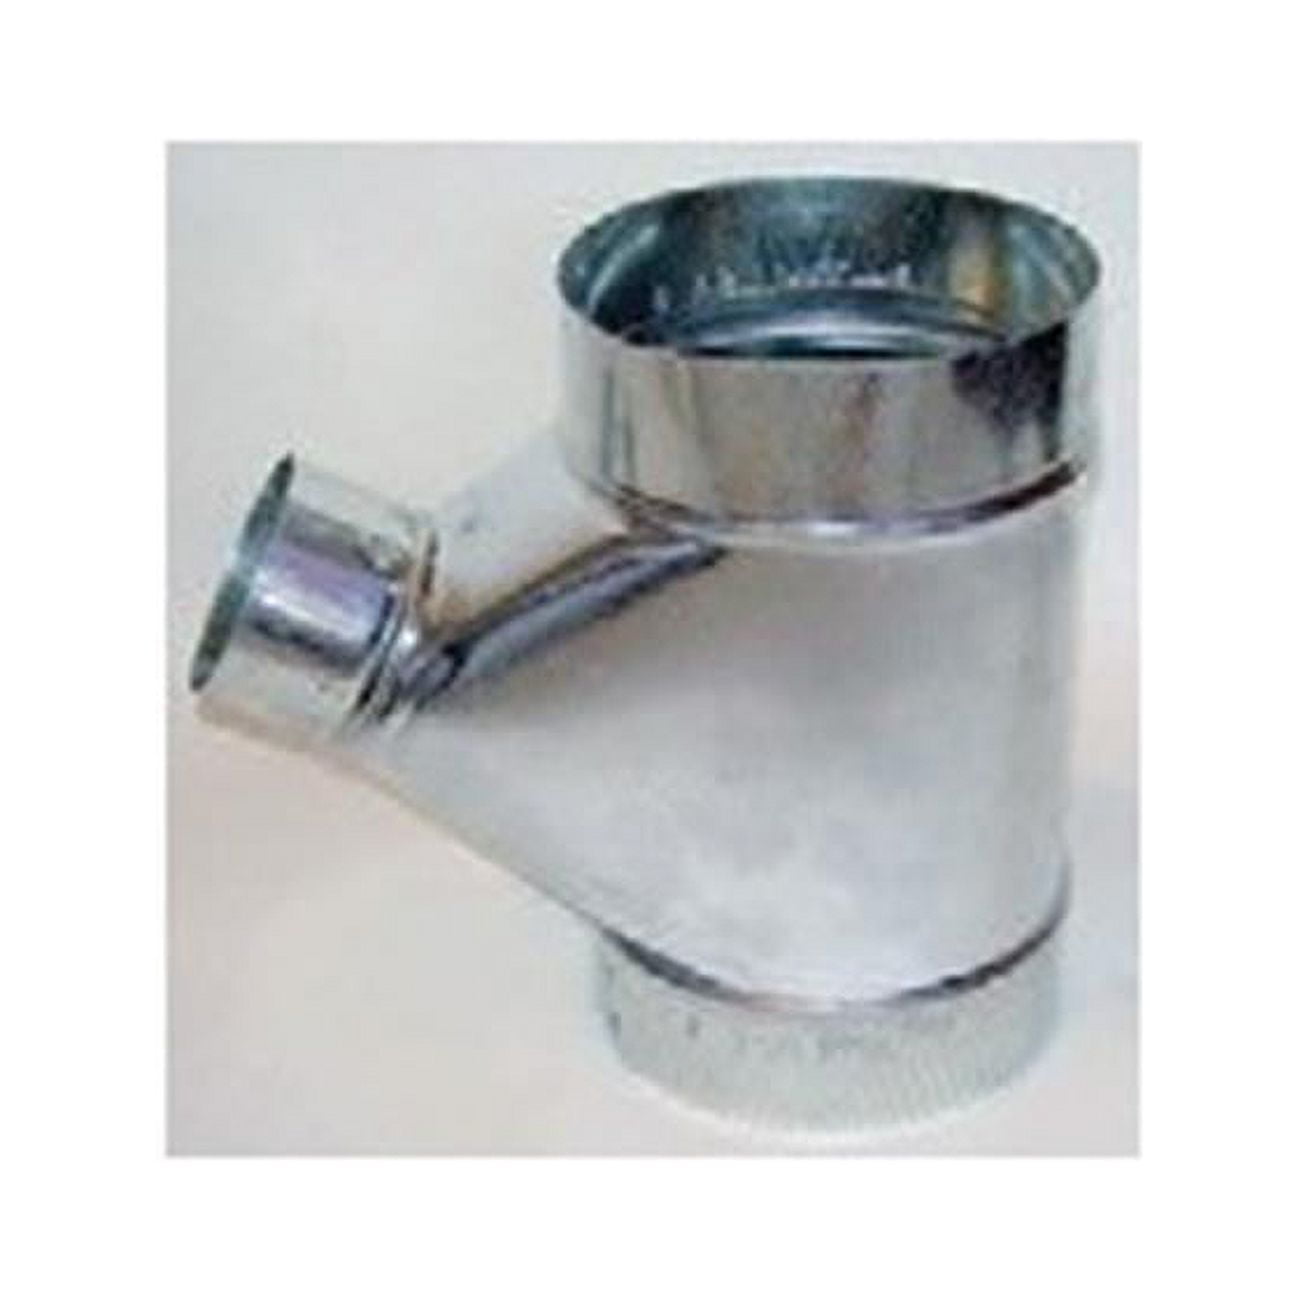 3603019 6 X 6 X 4 In. Galvanized Connector Wye Pipe